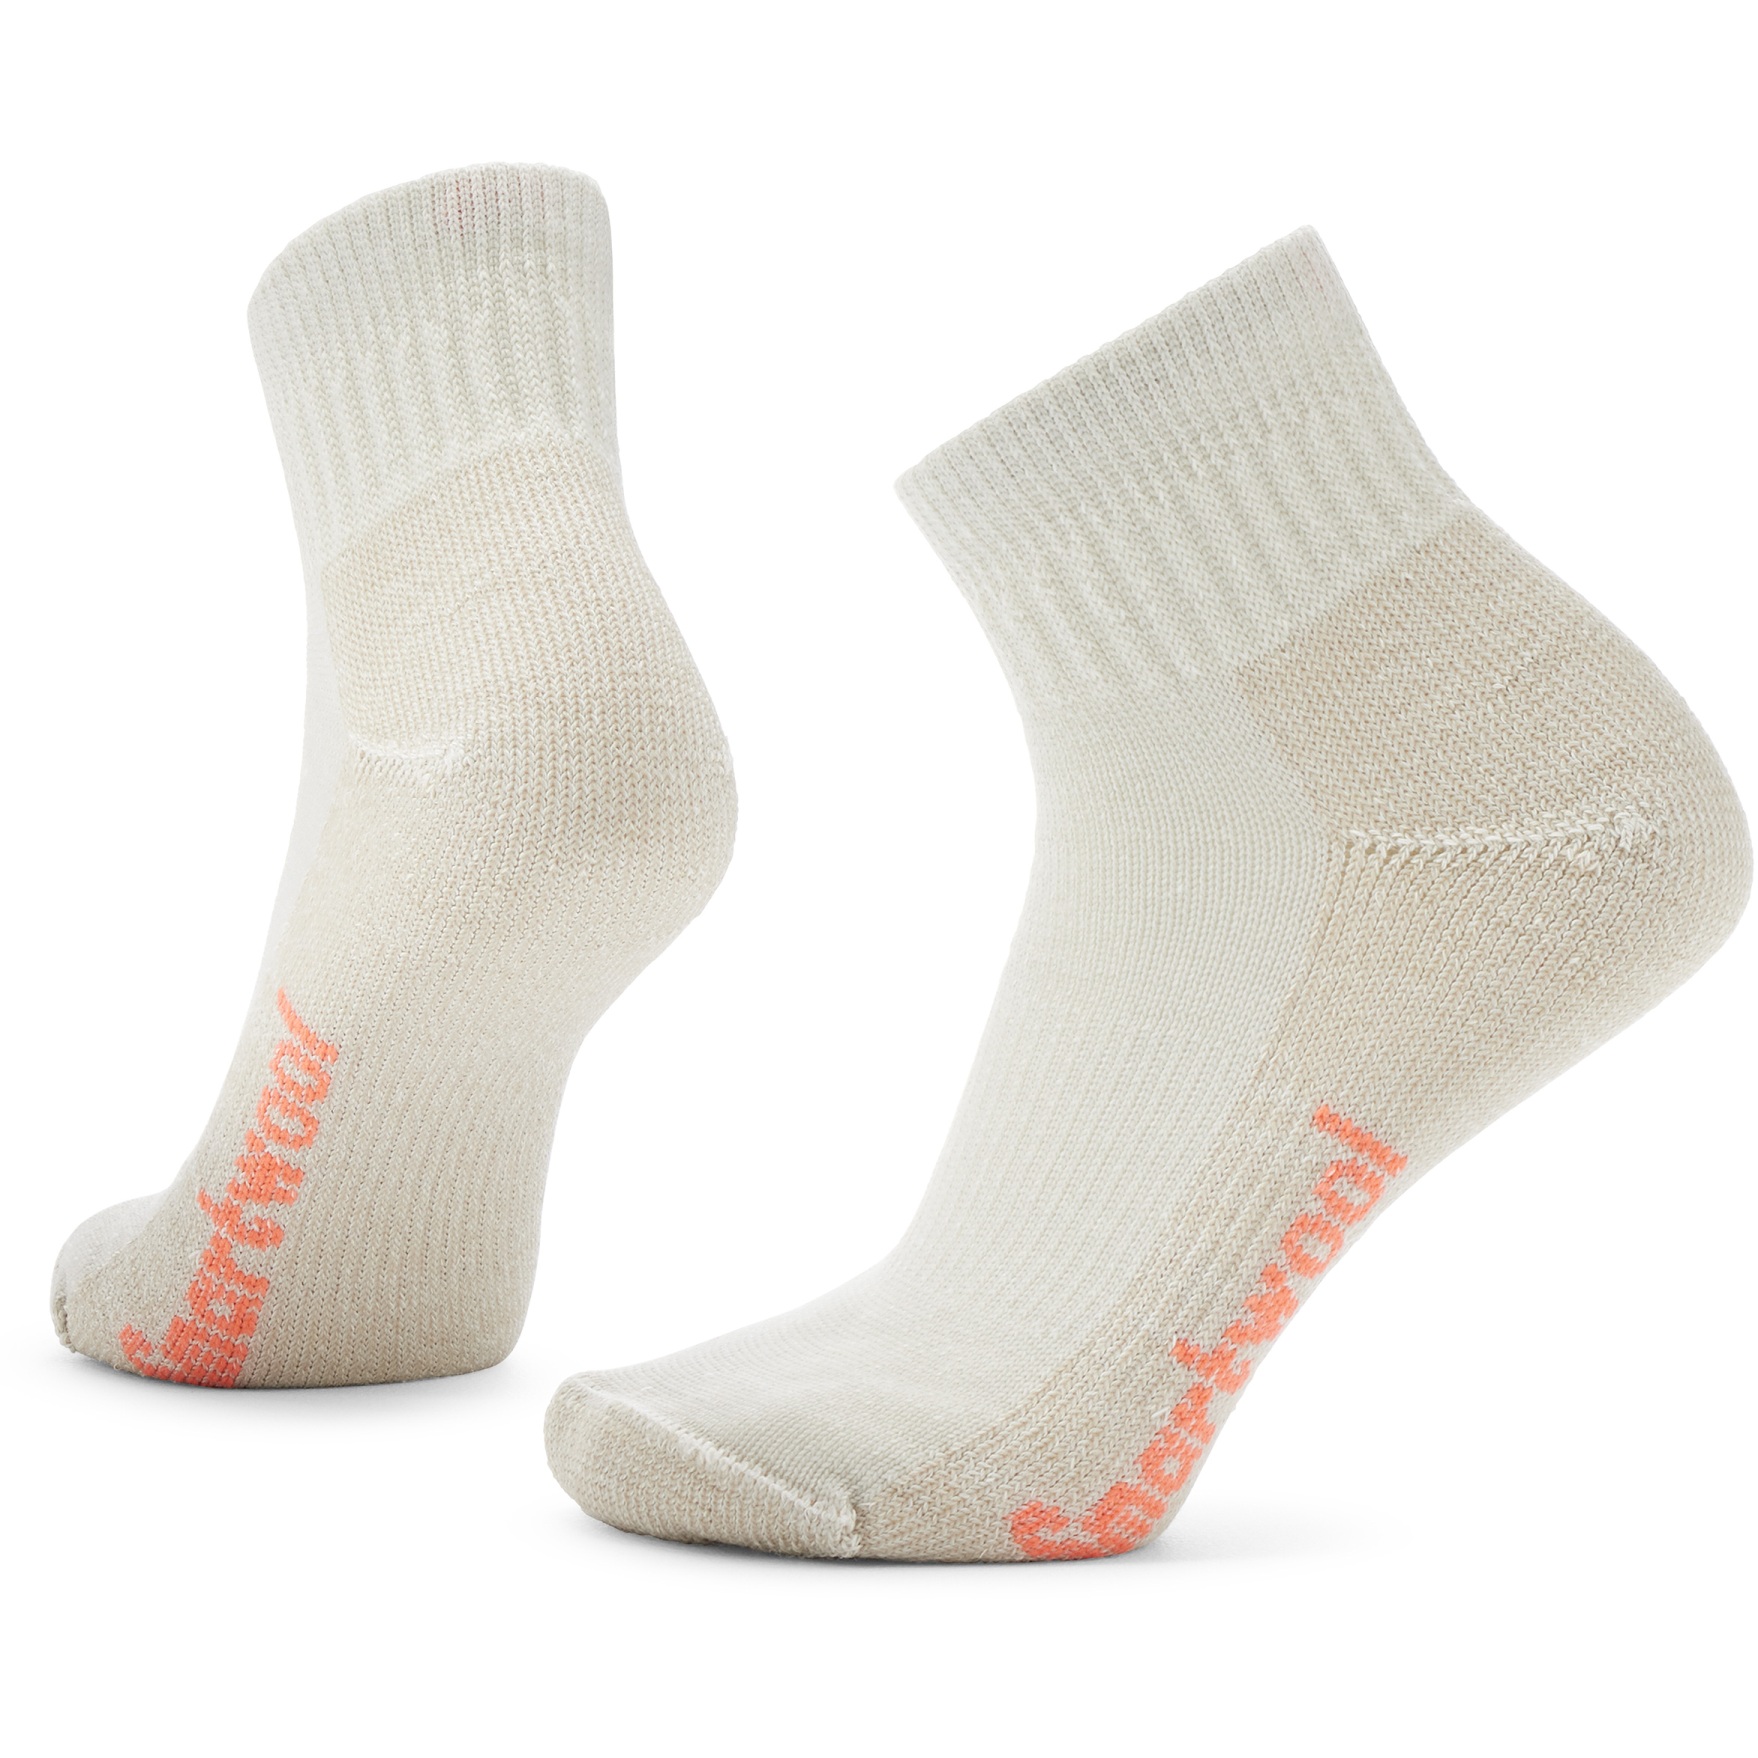 Foto de SmartWool Calcetines Senderismo Mujer - Classic Edition Light Cushion Ankle - 069 ash